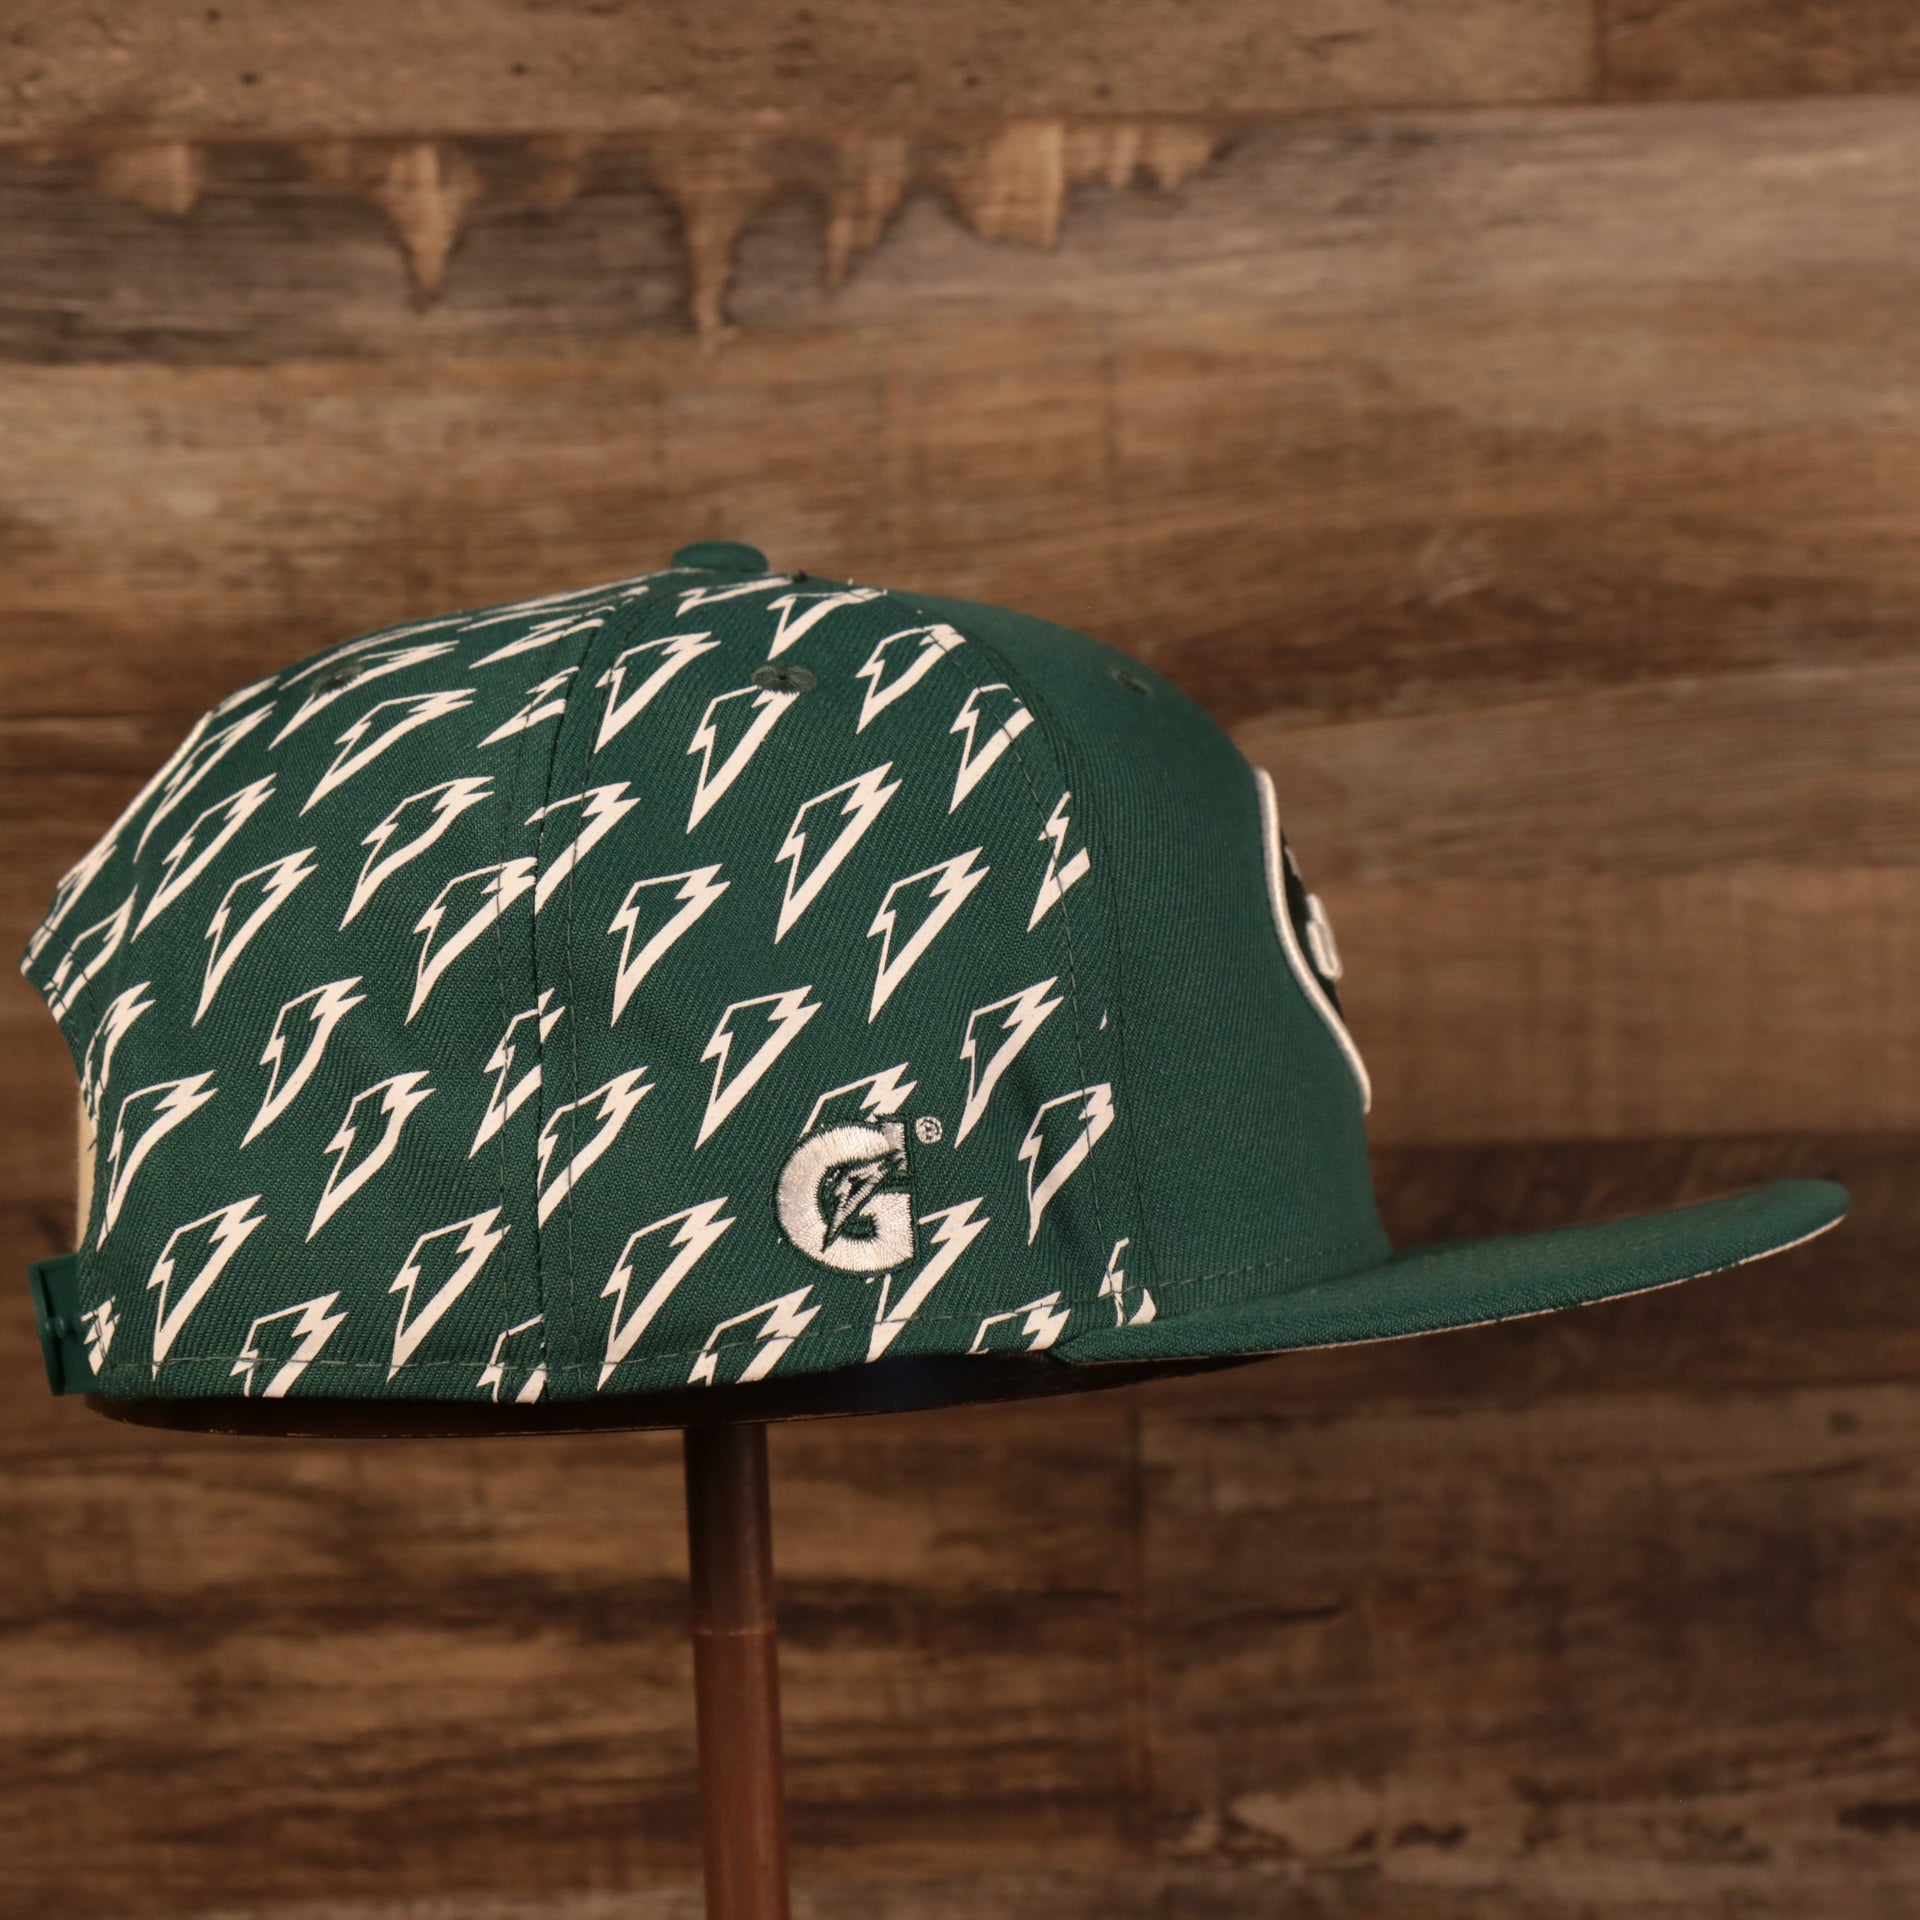 wearers right side of the New York Jets x Gatorade Green 9Fifty White Bottom Snapback